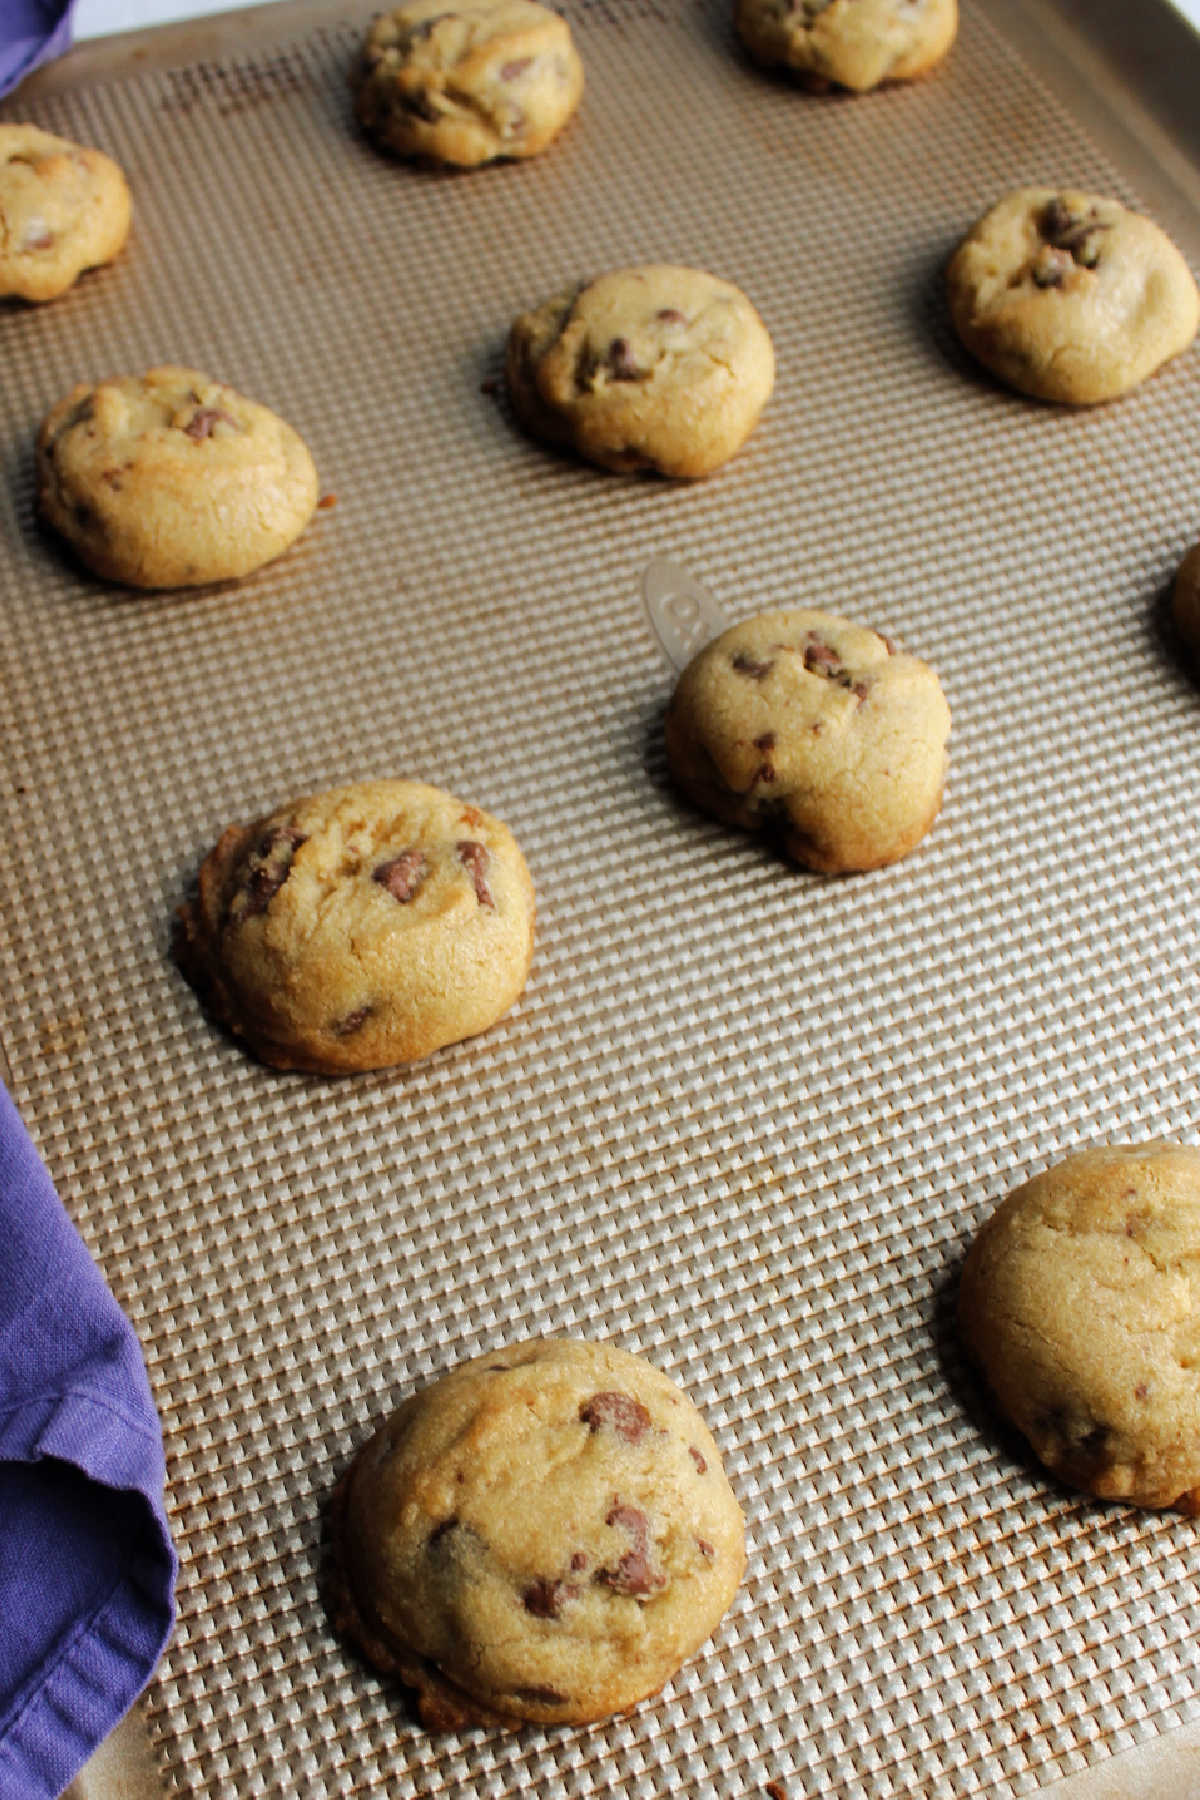 Freshly baked lard chocolate chip cookies on sheet pan straight from the oven.